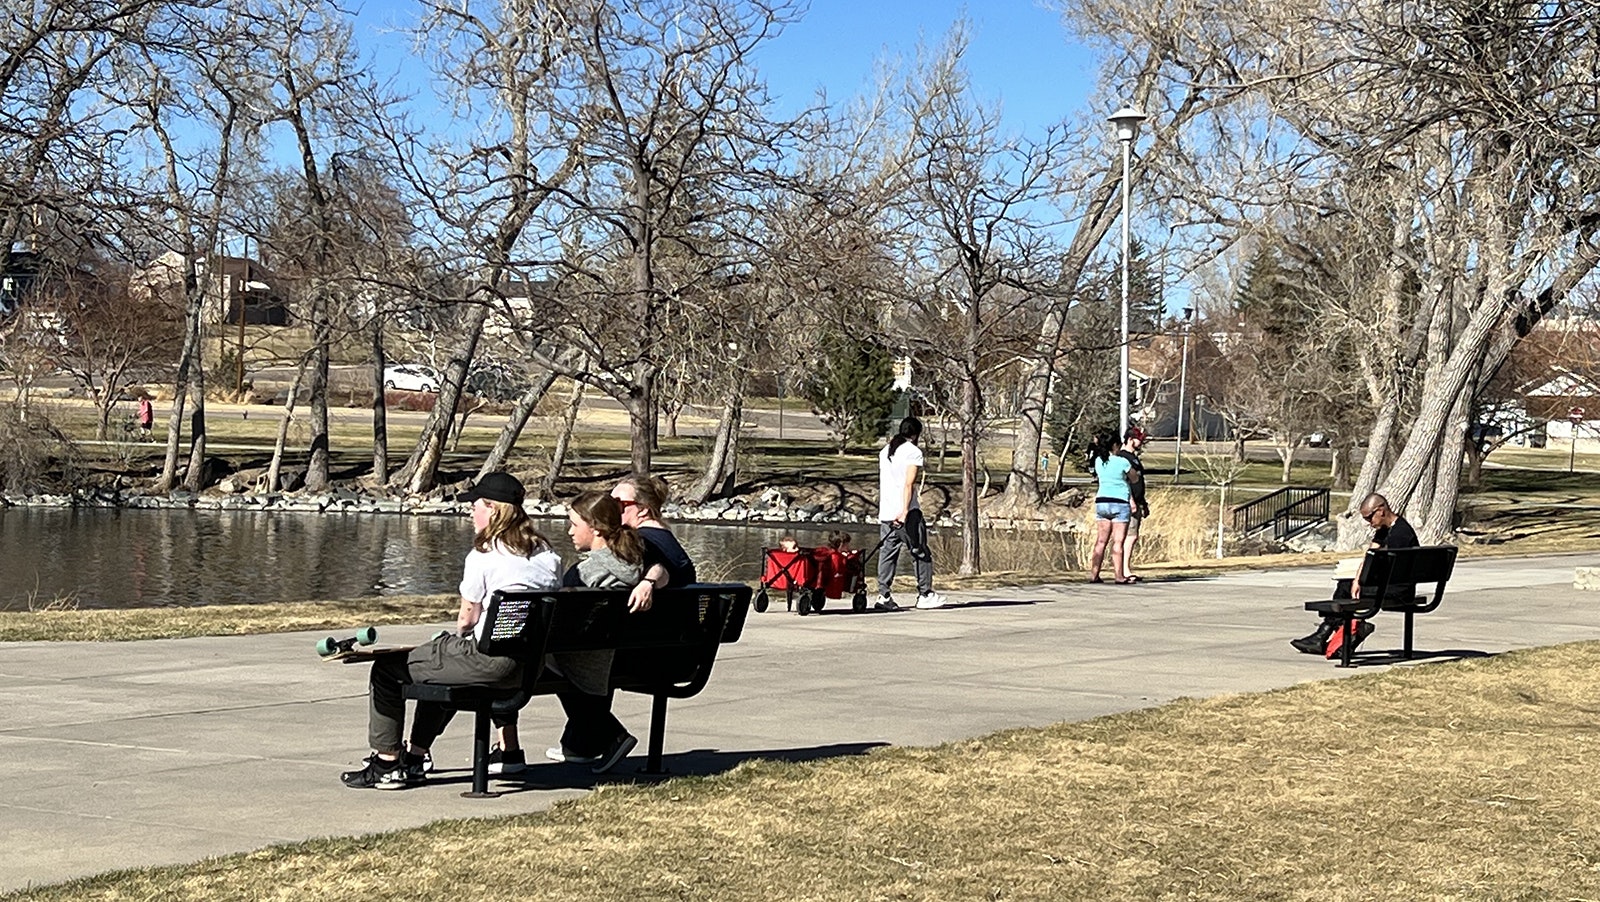 Record 80-degree heat Tuesday brought Cheyenne residents outside to enjoy a sudden burst of spring at Holiday Park.